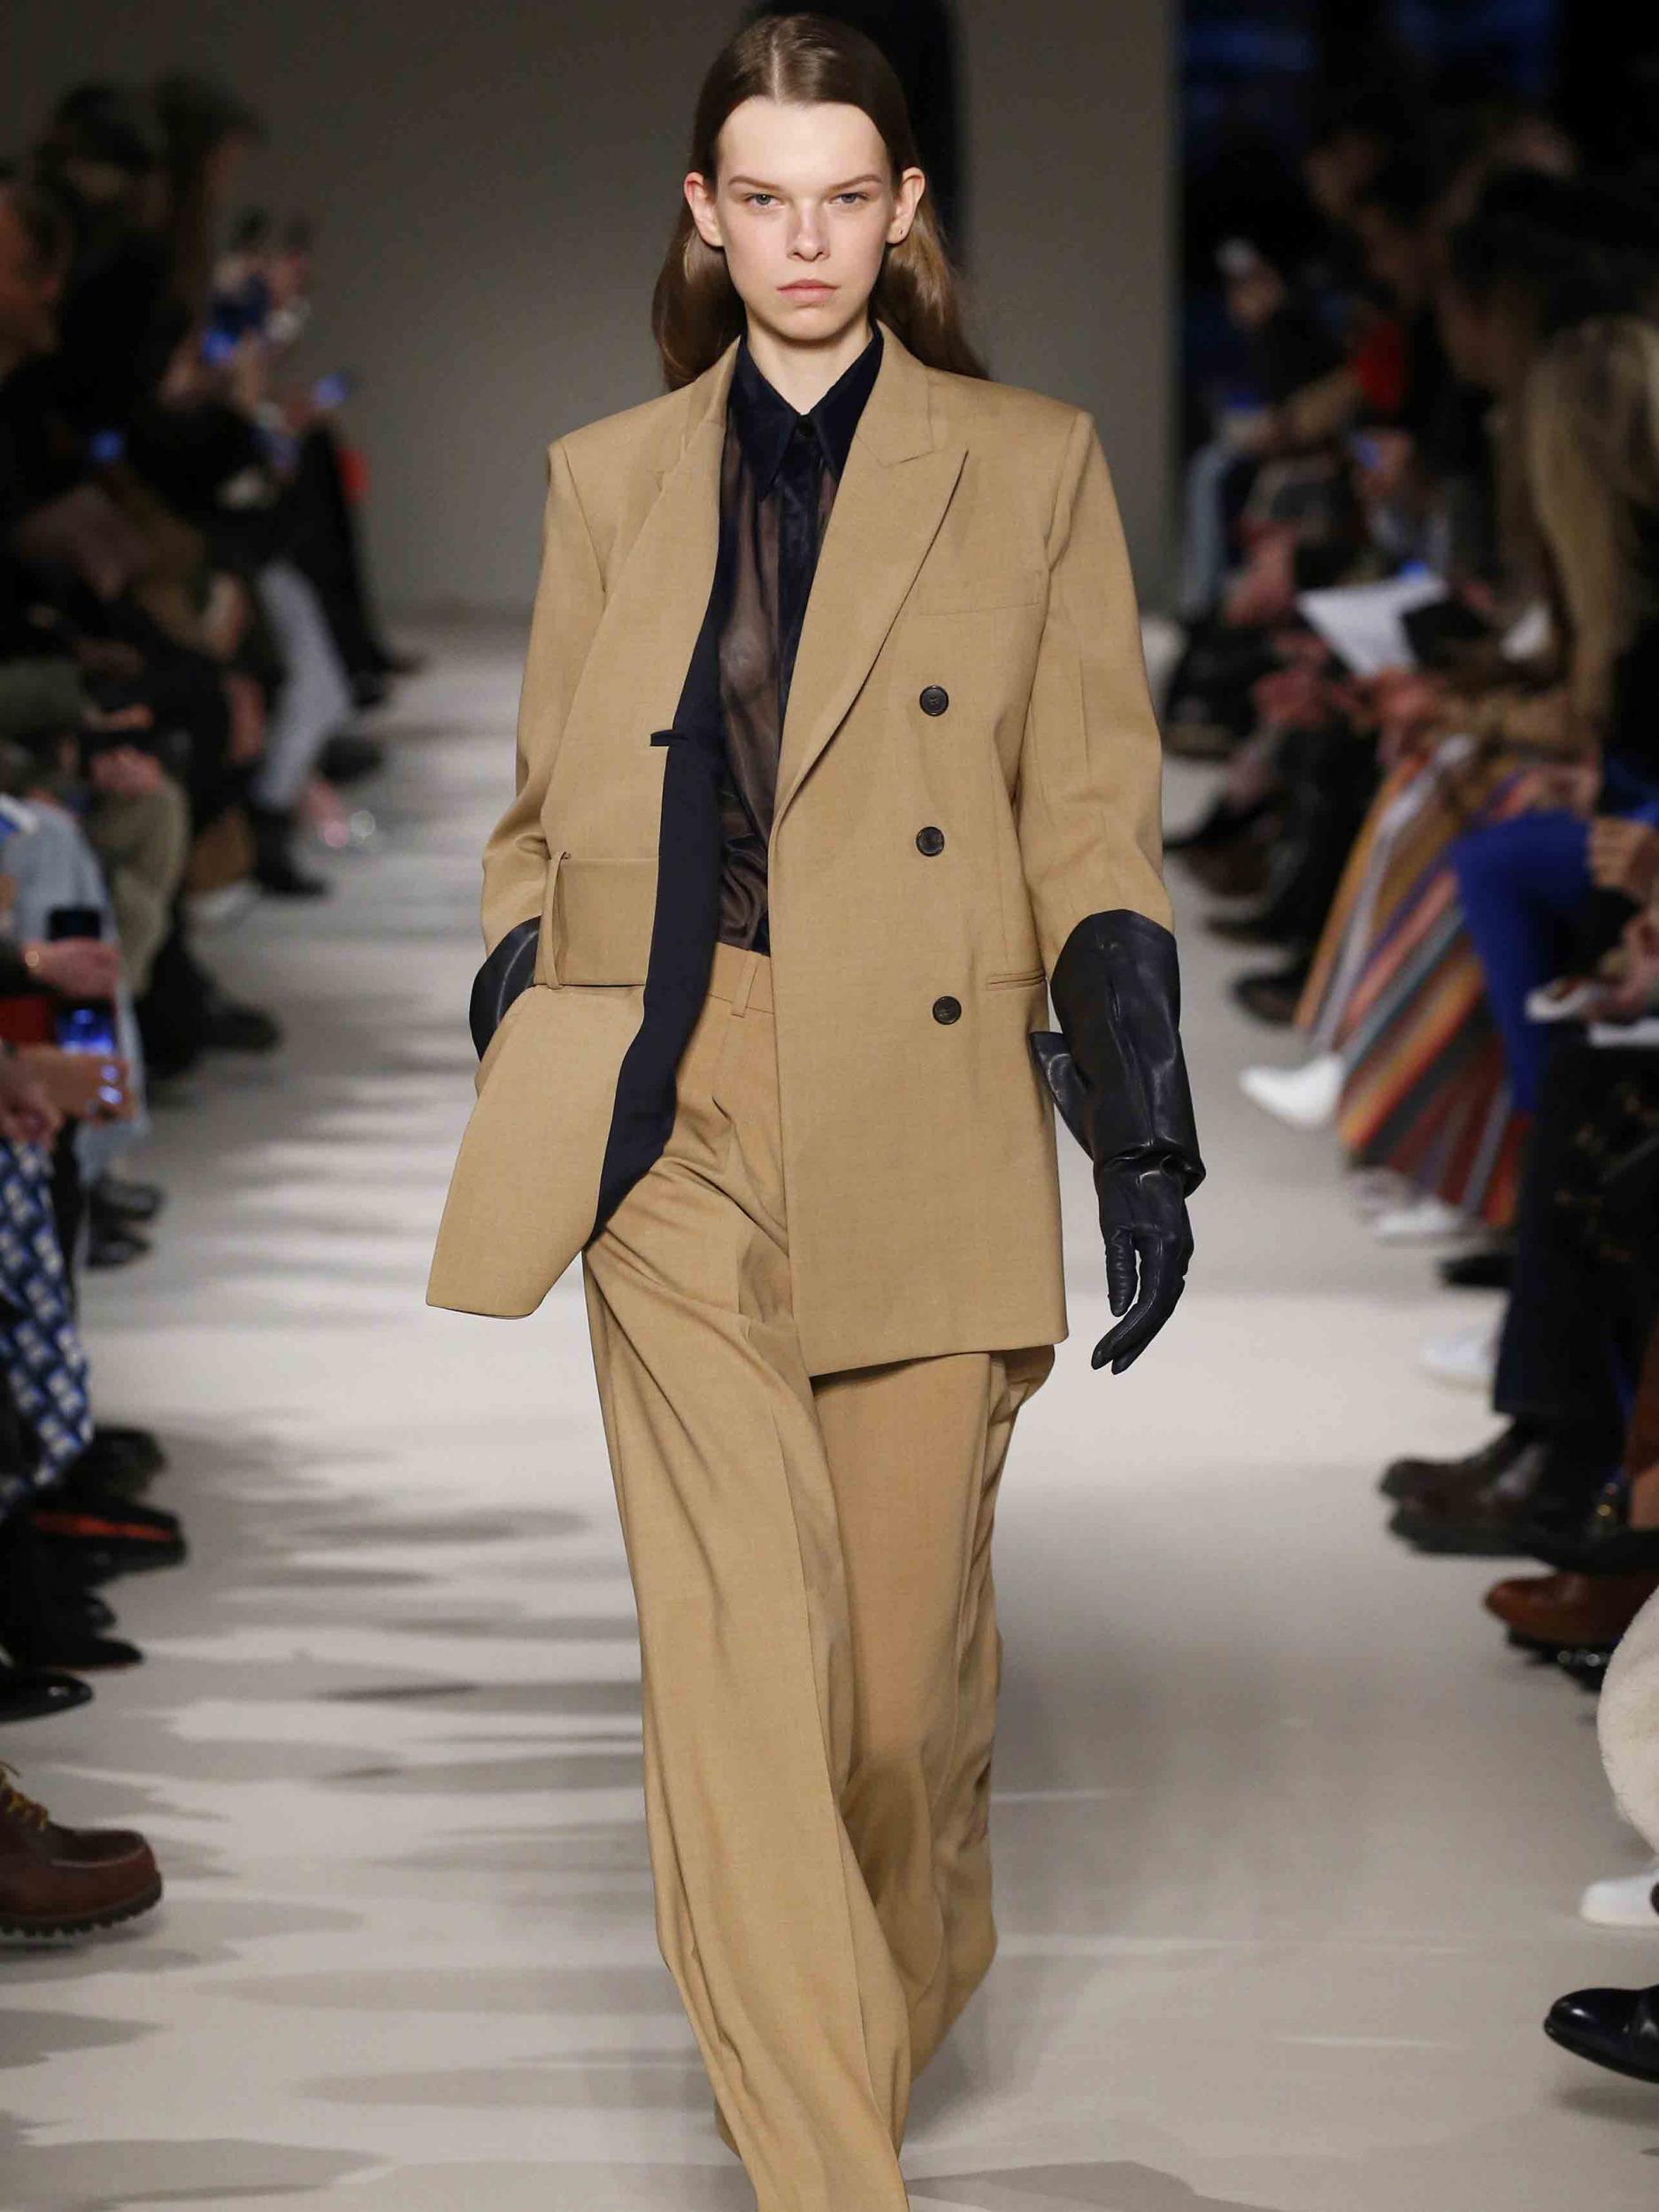 Victoria Beckham rolled out a refined collection of suits